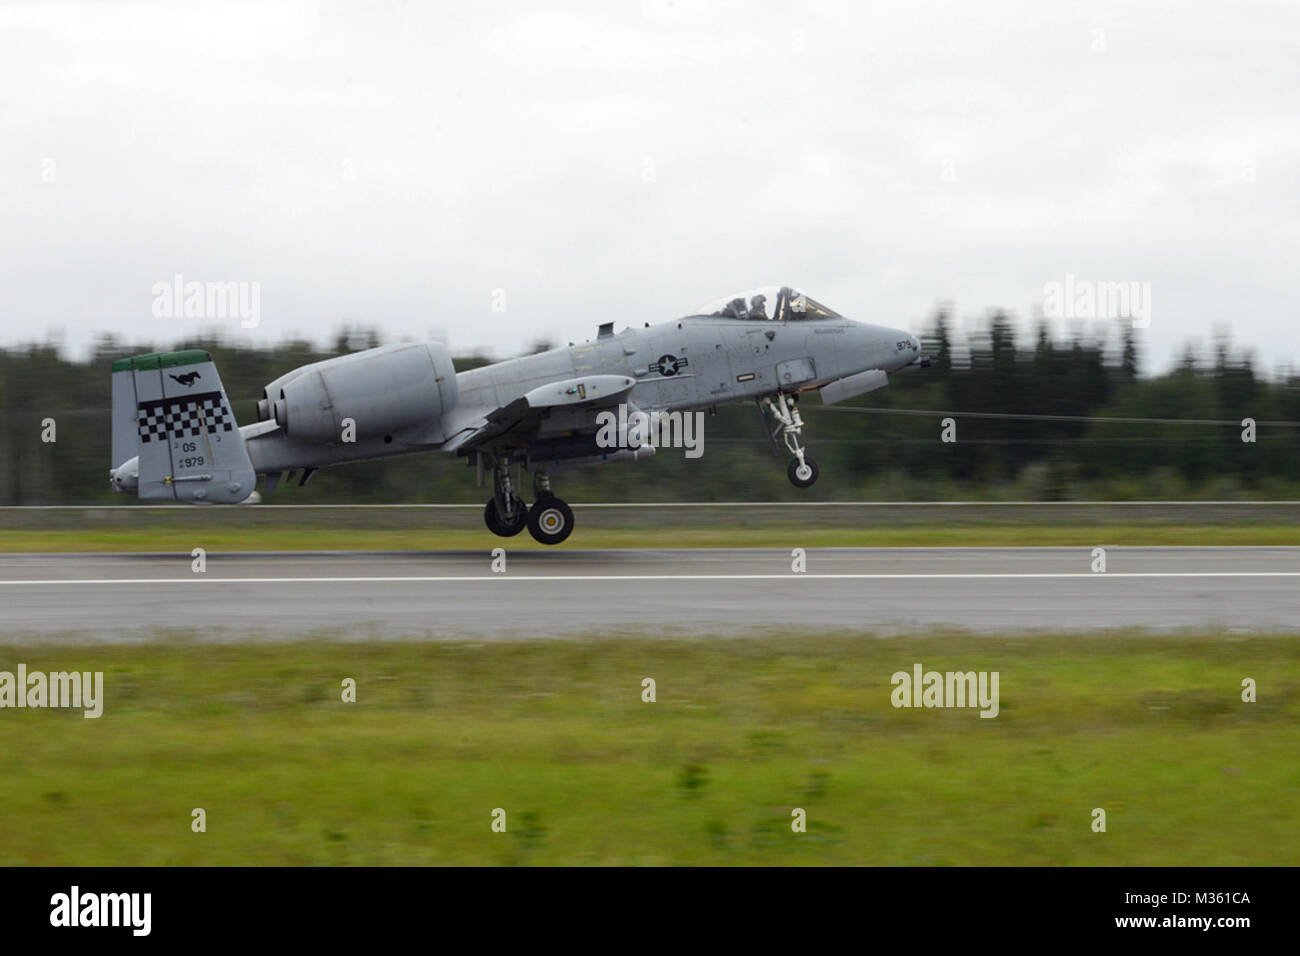 A U.S. Air Force A-10 Thunderbolt II assigned to the 25th Fighter Squadron, Osan Air Base, Republic of Korea, takes off from Eielson Air Force Base, Alaska, Aug. 10, 2015, during RED FLAG-Alaska (RF-A) 15-3. RF-A is a series of Pacific Air Forces commander-directed field training exercises for U.S. and partner nation forces, providing combined offensive counter-air, interdiction, close air support and large force employment training in a simulated combat environment. (U.S. Air Force photo by Senior Airman Ashley Nicole Taylor/Released) A-10 Thunderbolt Takes Off for Field Training Exercise dur Stock Photo